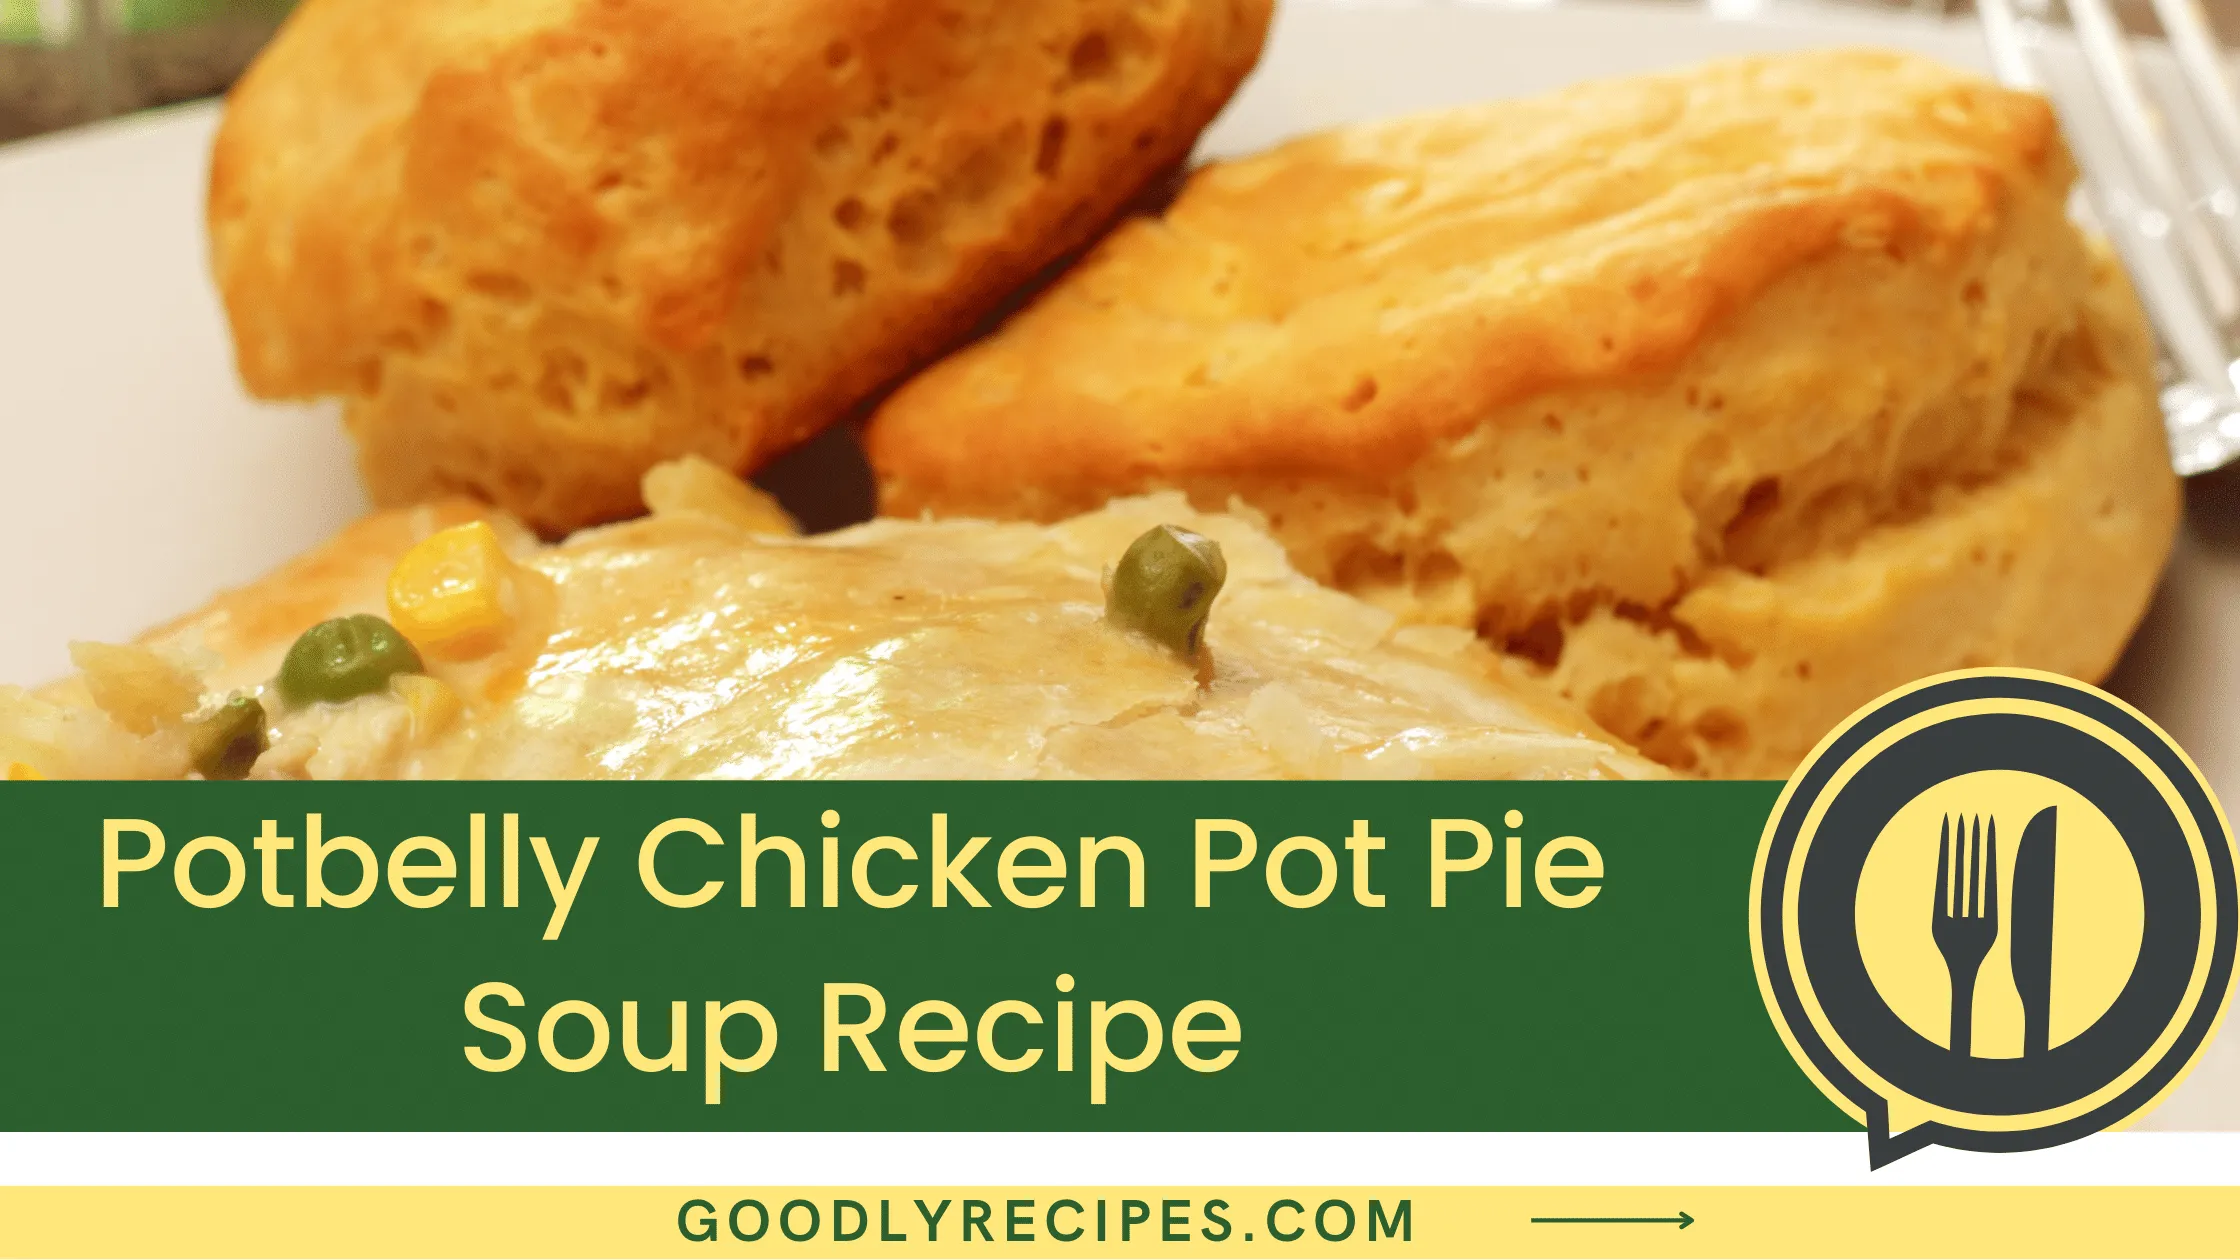 What is Potbelly Chicken Pot Pie Soup?